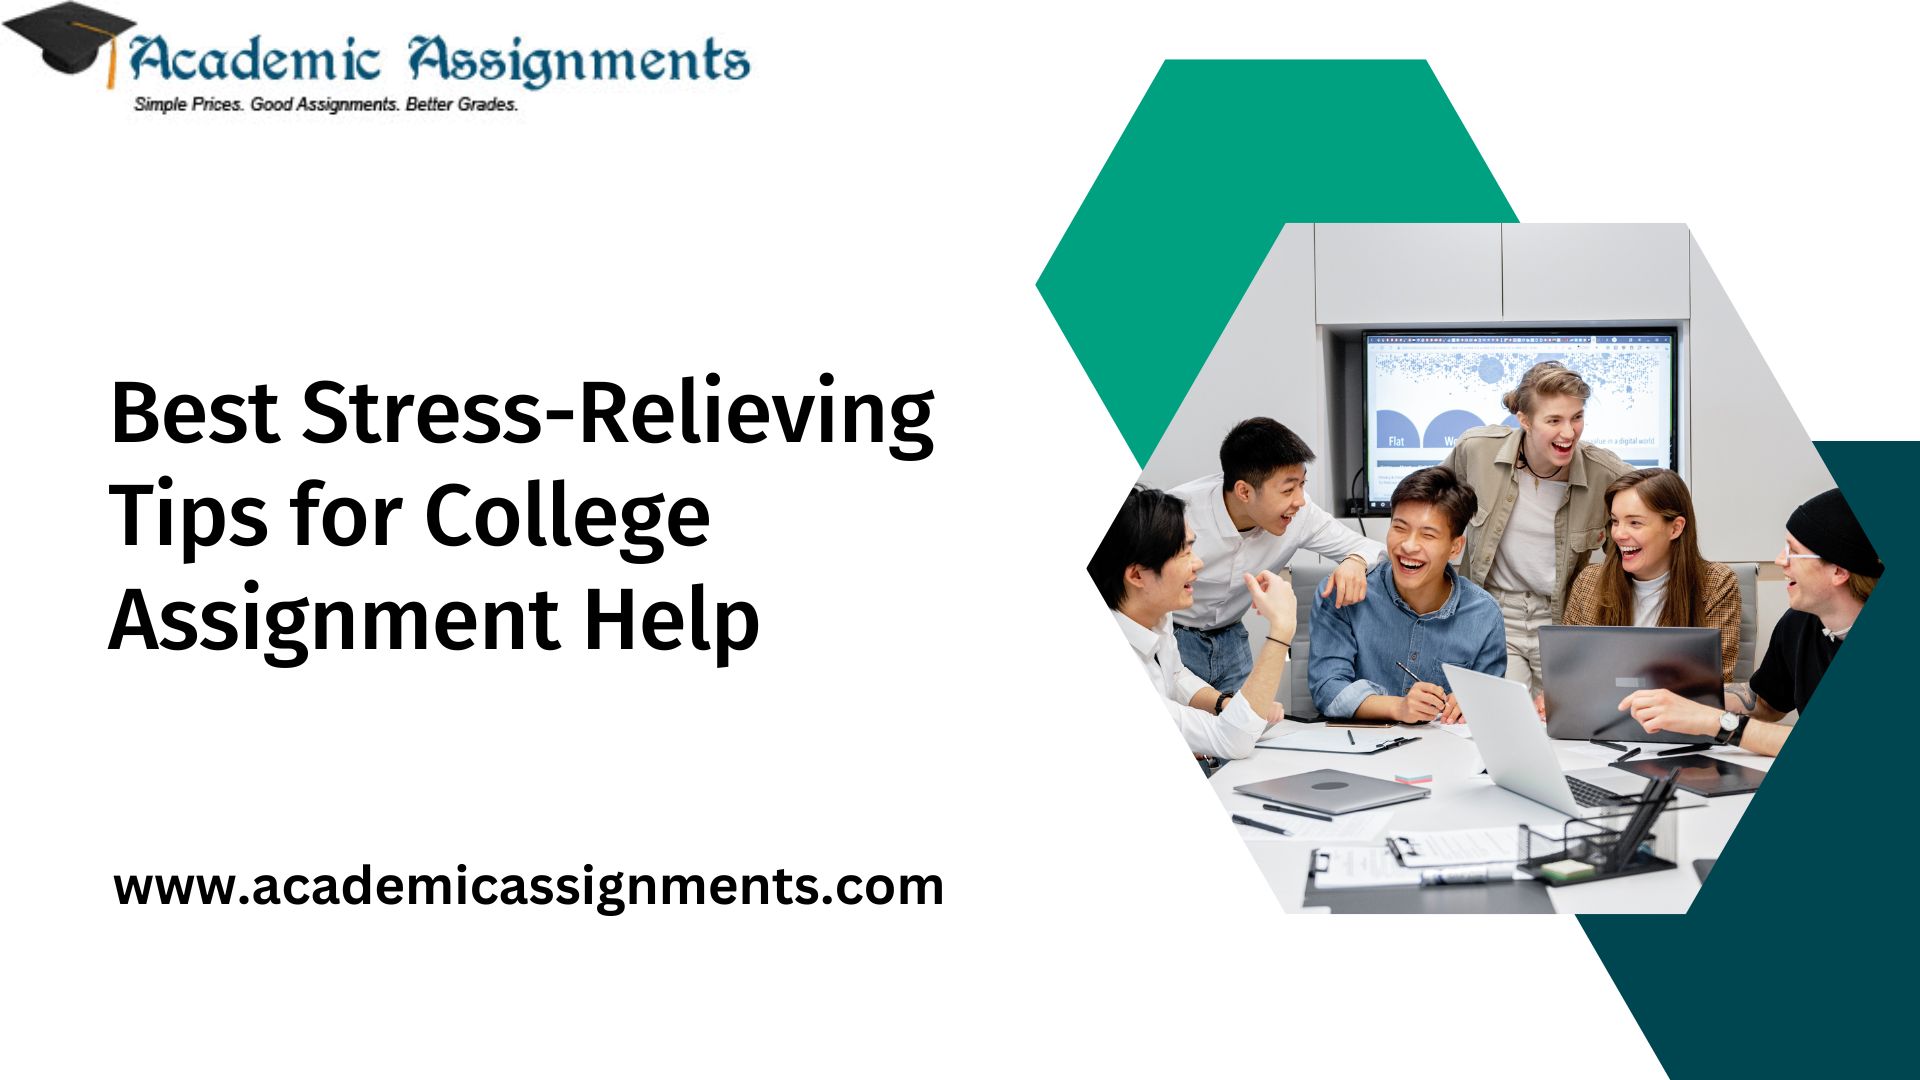 Best Stress-Relieving Tips for College Assignment Help